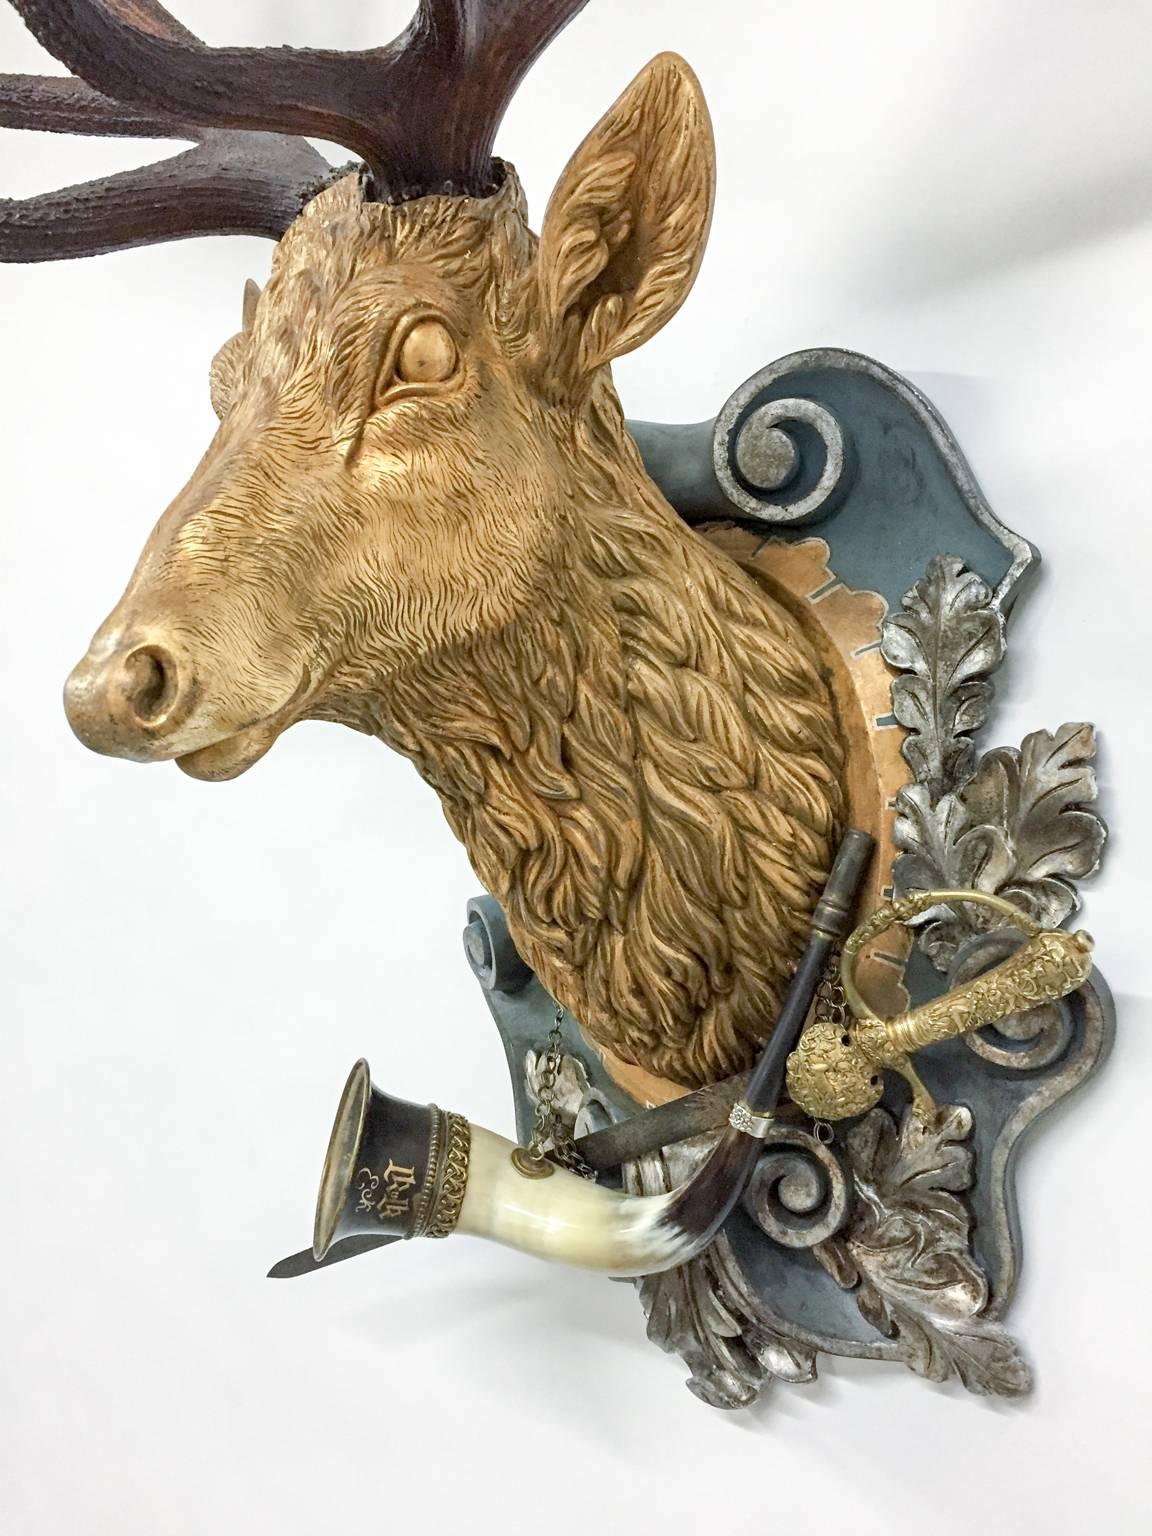 Carved 19th Century Habsburg Red Stag Trophy with Hunt Horn & Hunt Sword